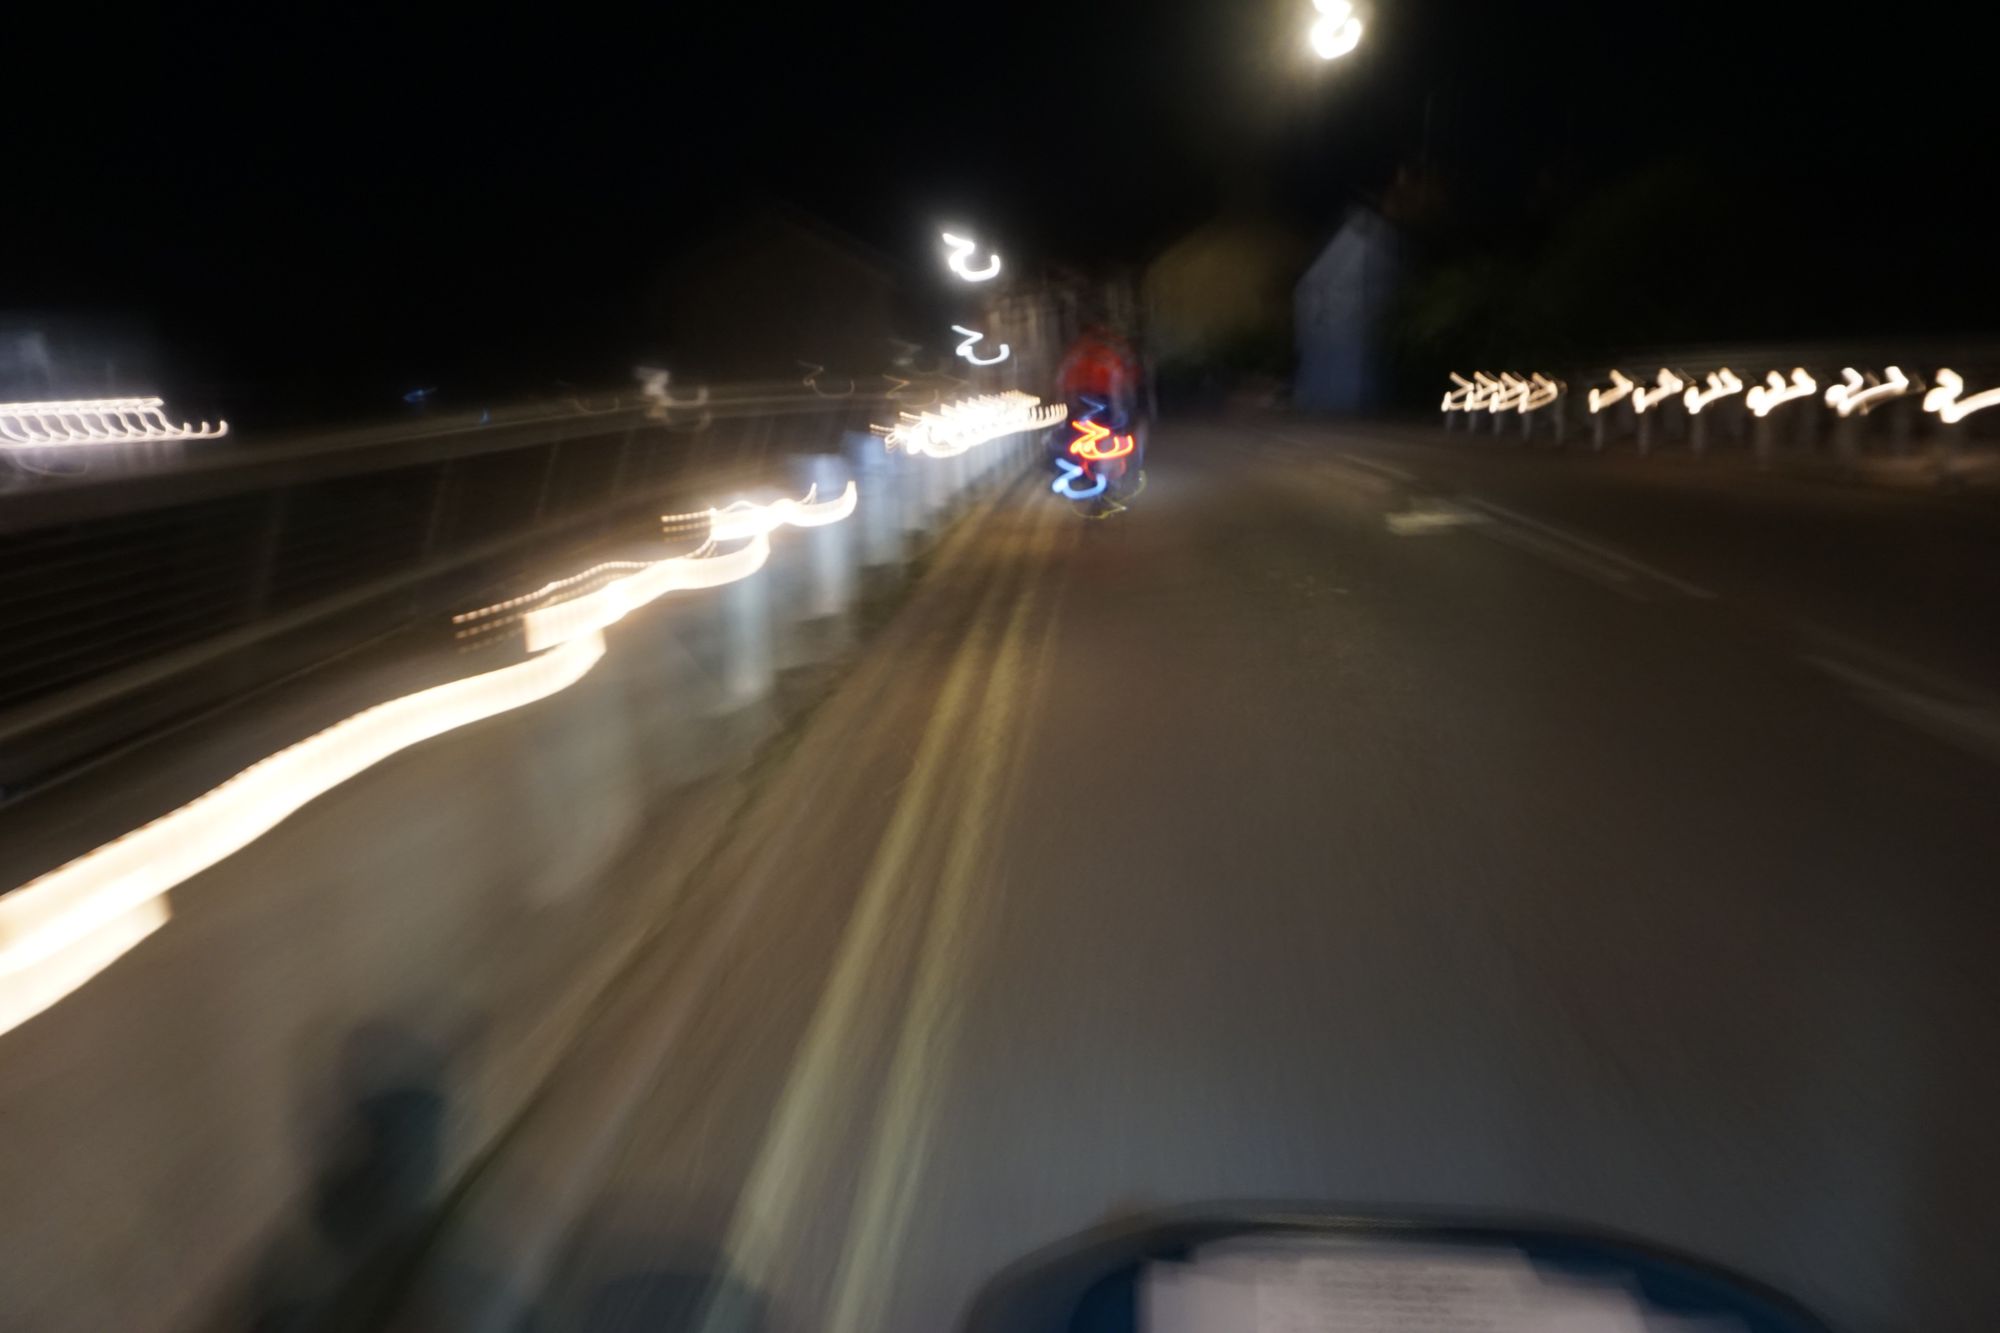 Blurry shot crossing a two-lane road bridge with lit bollards and modernist arced balustrades on either side.